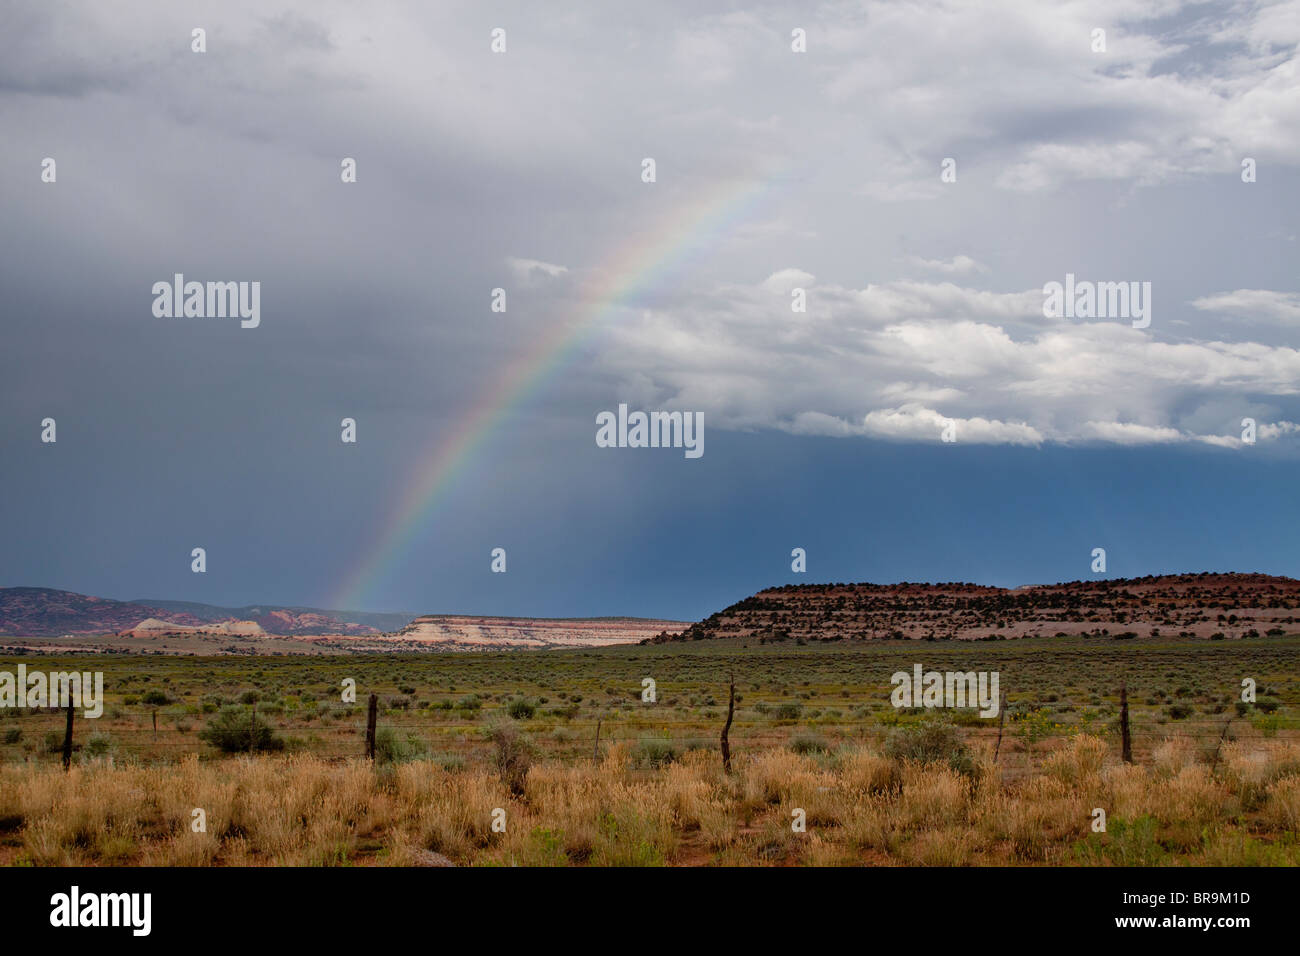 Rainbow emerging from a mesa landscape in the high desert of Utah, USA Stock Photo